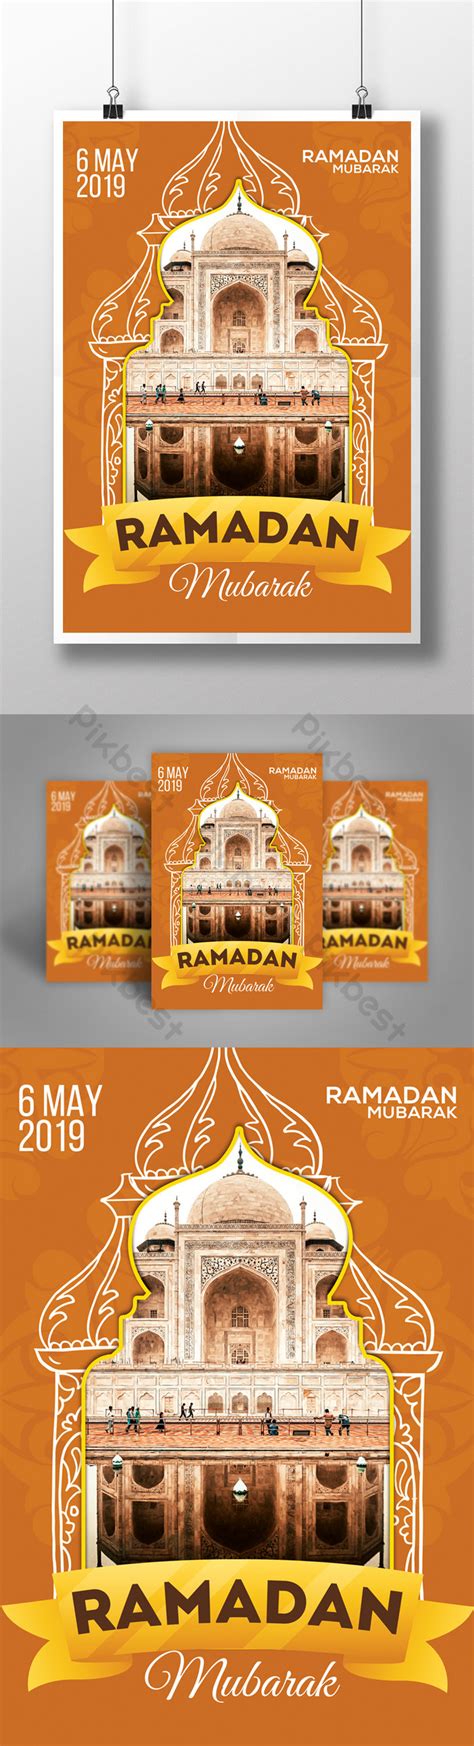 Unique Style Ramadan Flyer Templates With Banner And Skeleton Of Mosque